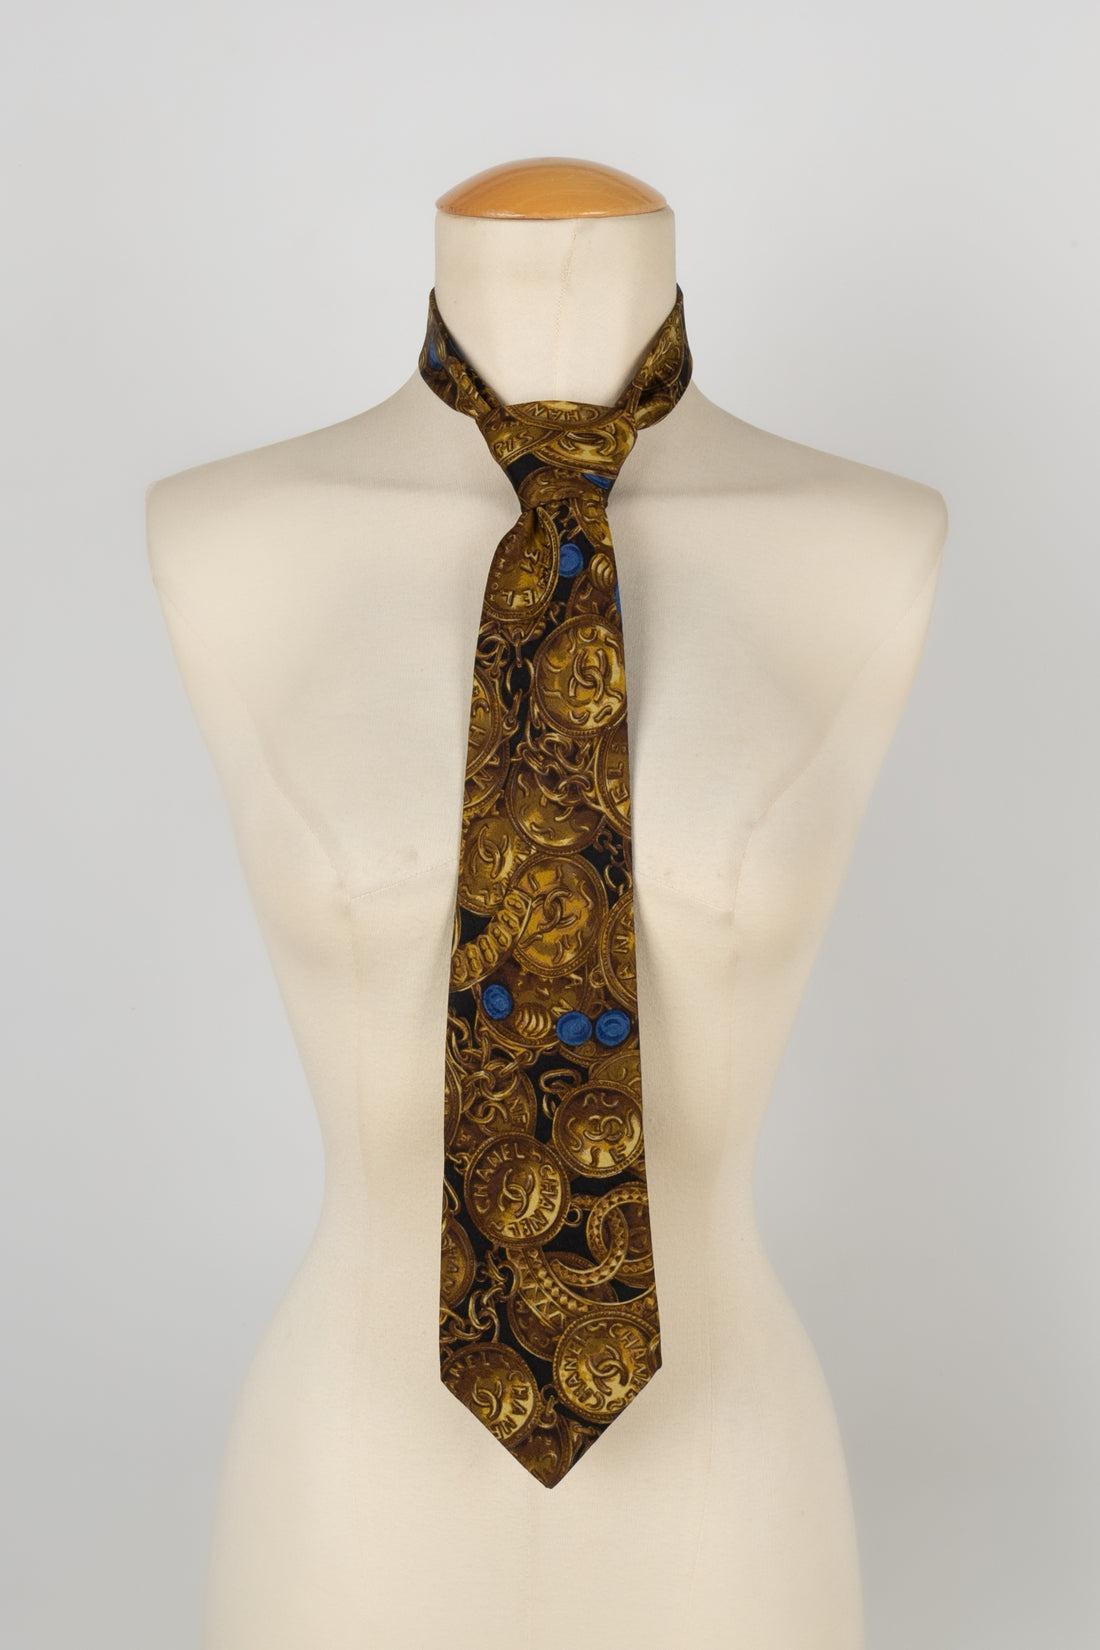 Chanel -  (Made in France) Silk tie printed with Chanel jewelry.

Additional information:
Condition: Very good condition
Dimensions: Length: 140 cm

Seller Reference: ACC146